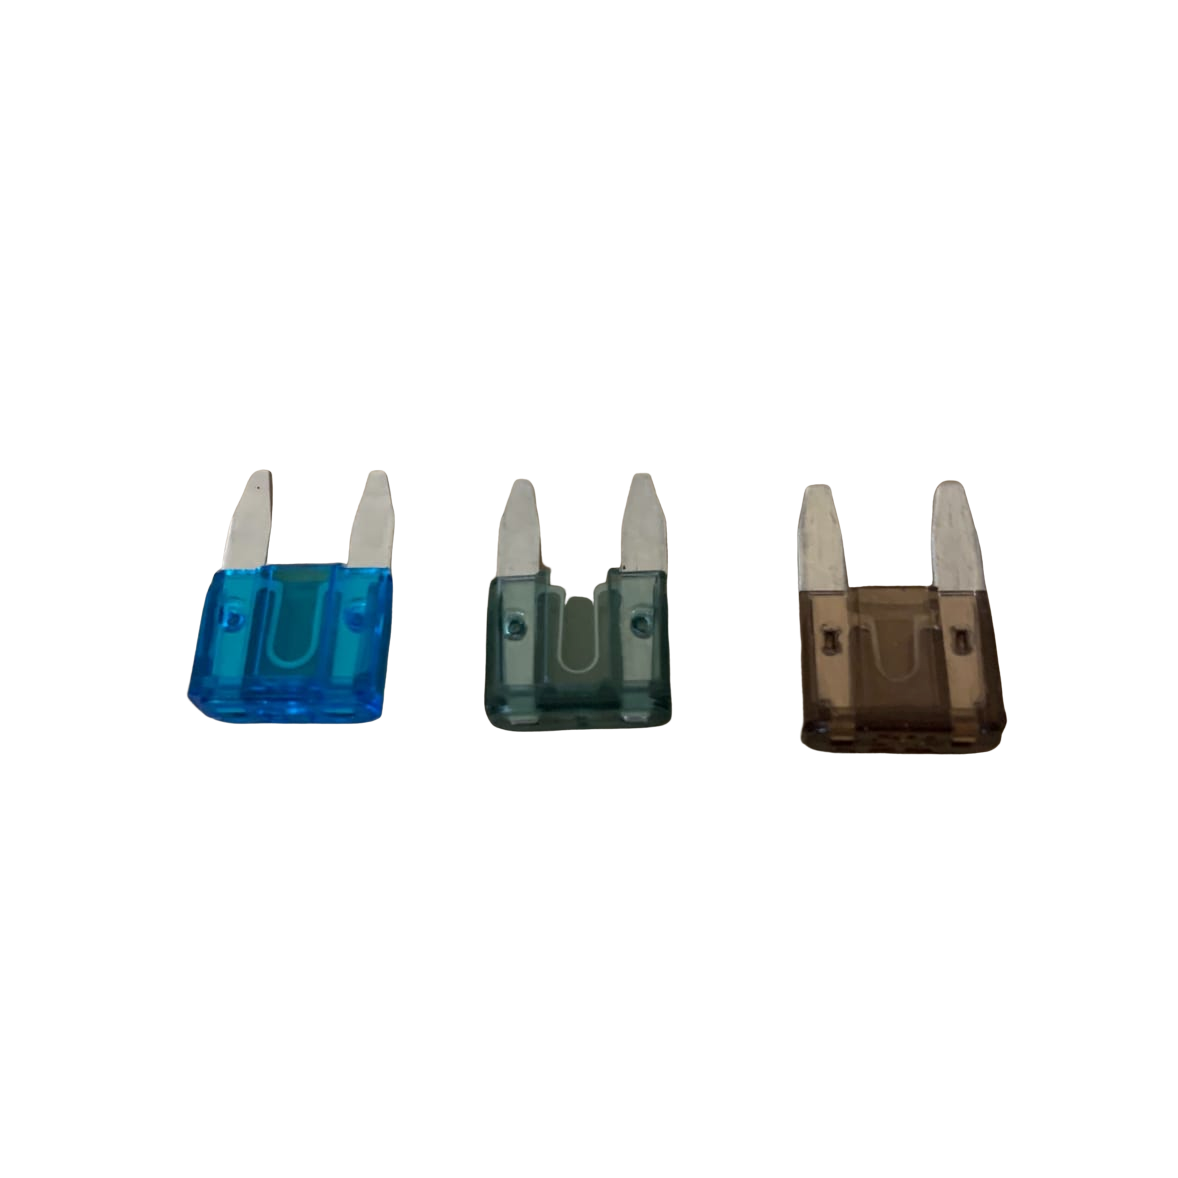 3-pack of Fuses for Duet